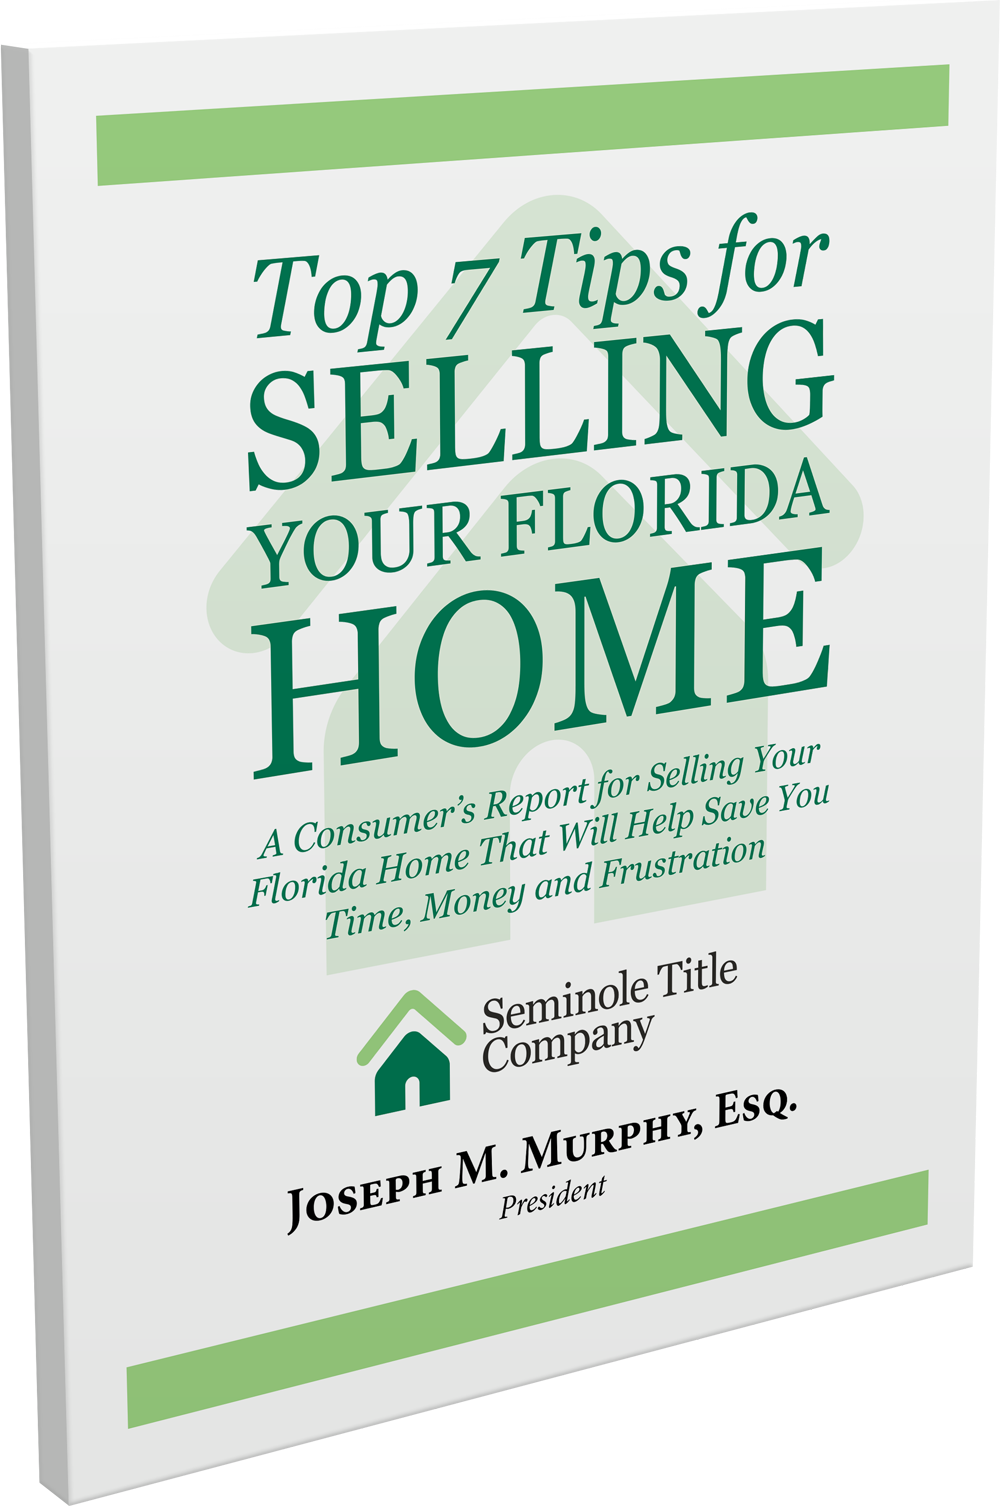 Tips for Selling a Home in Florida